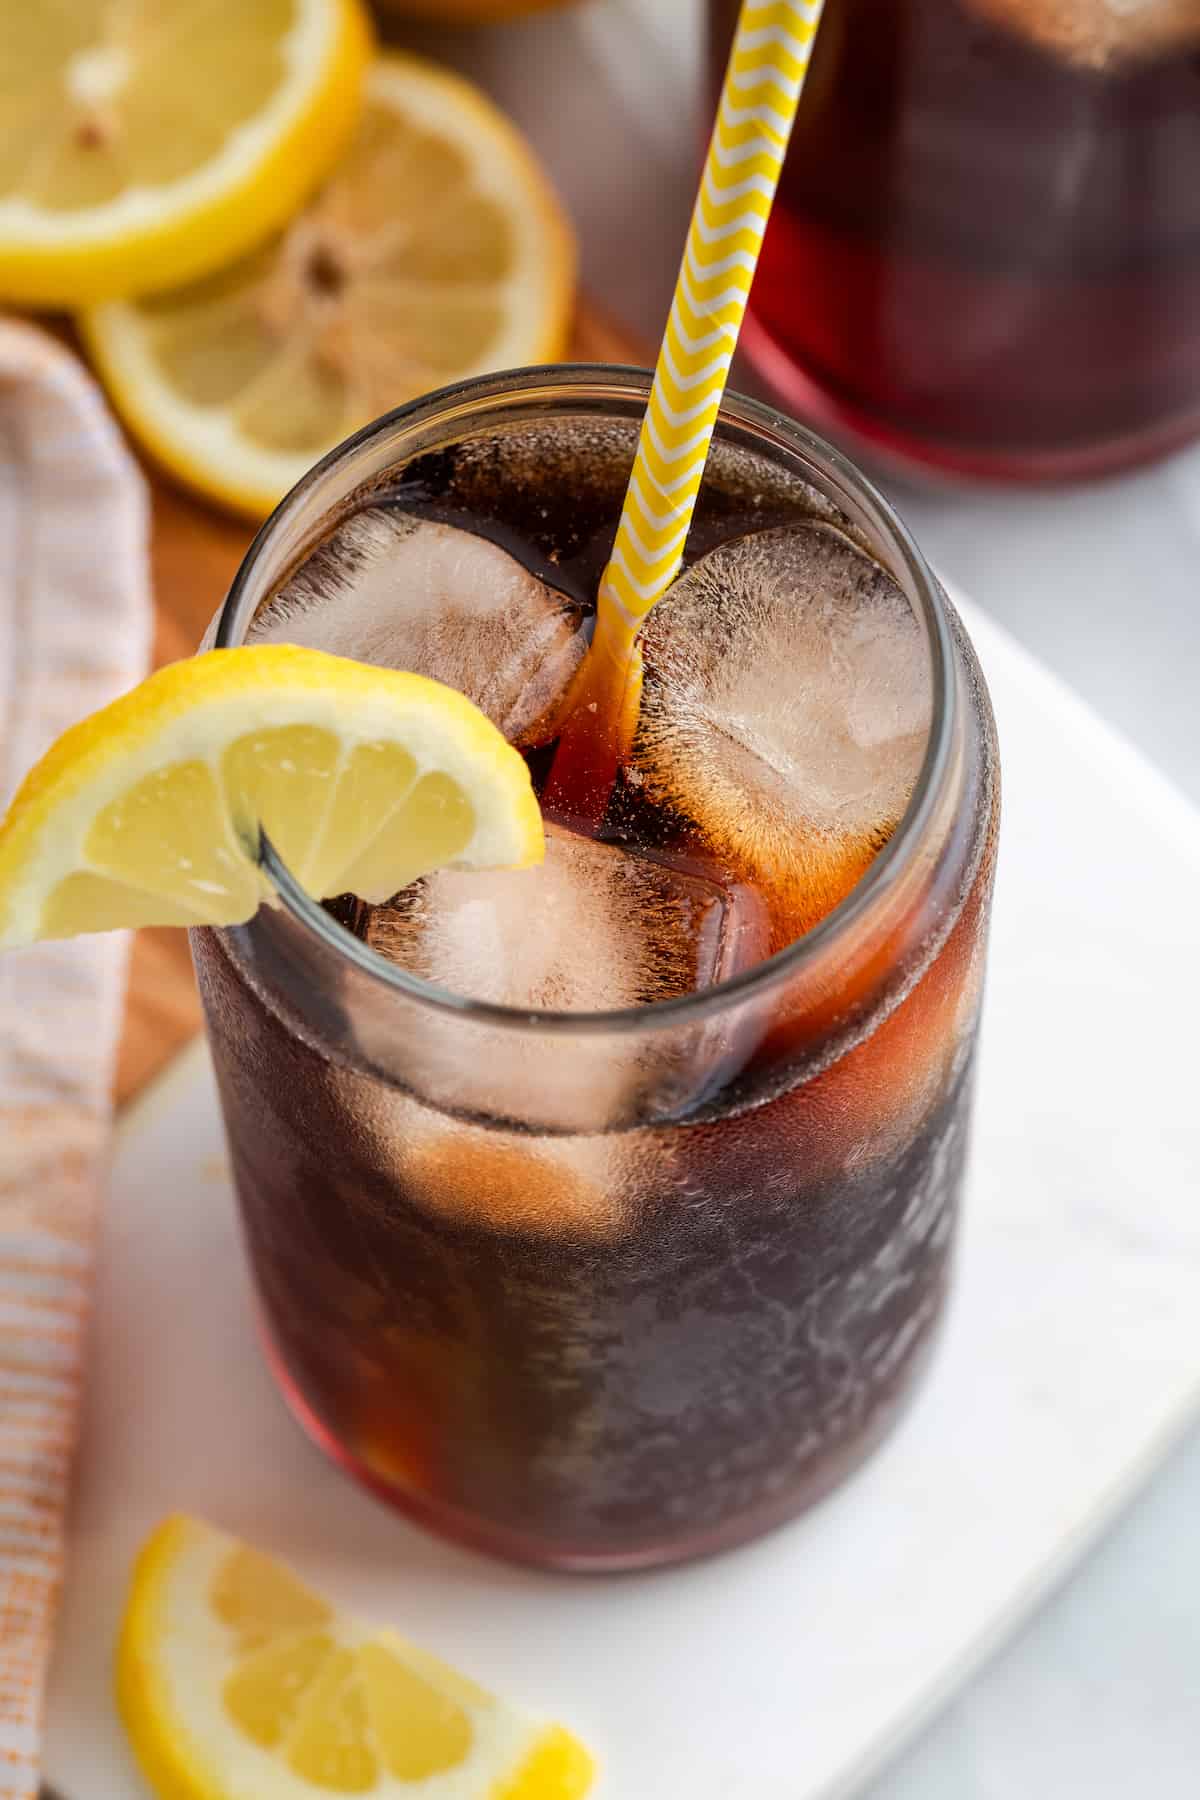 Top down view of Southern sweet tea in glass with ice and straw, with lemon wedge on rim